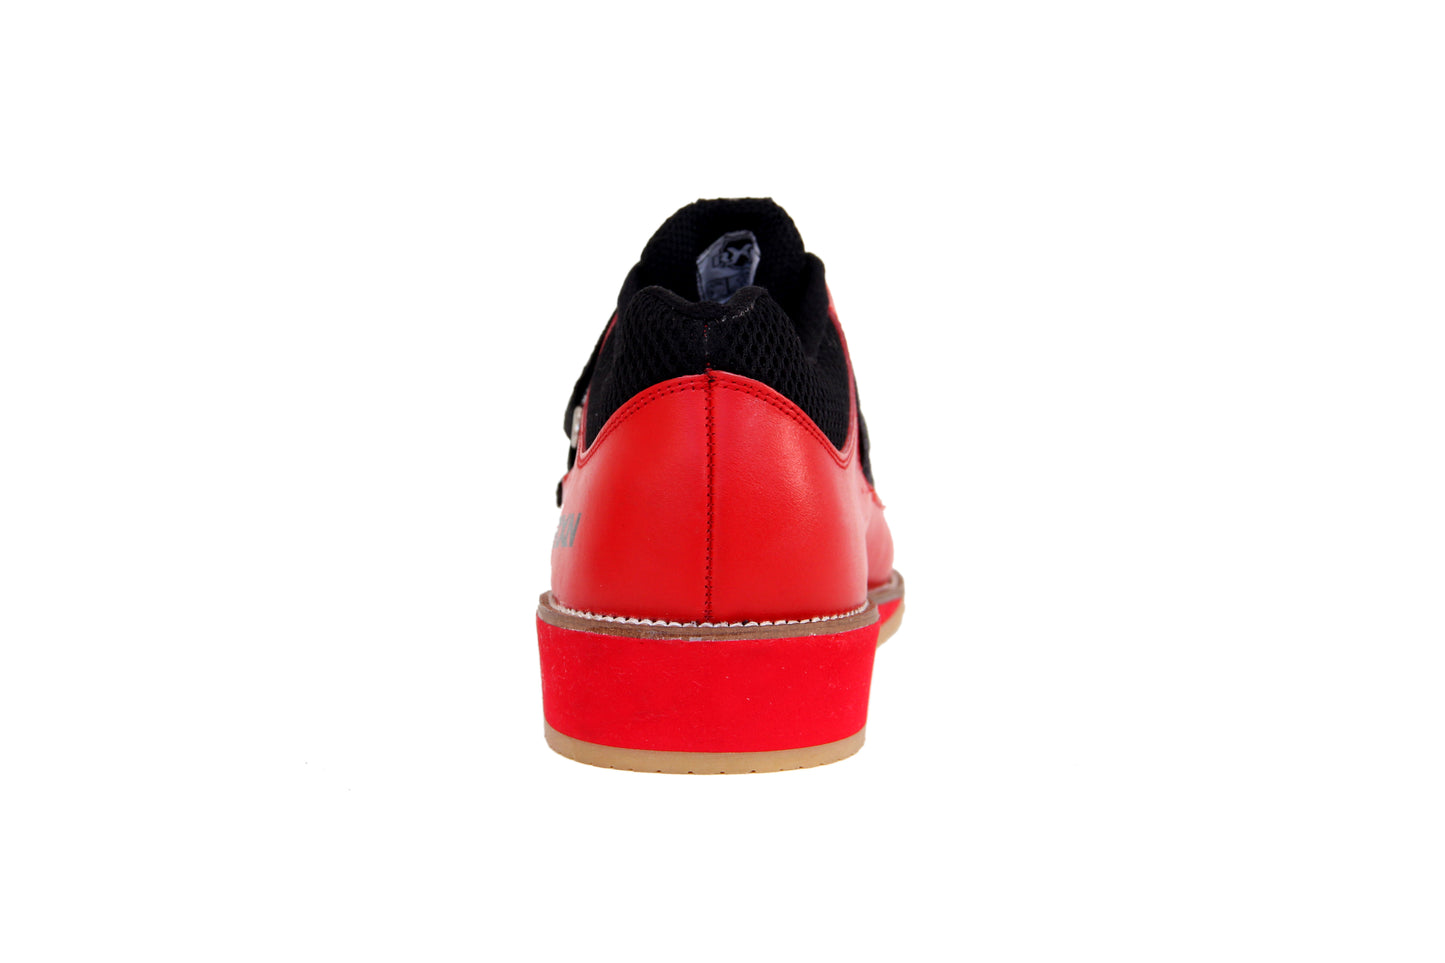 RXN WLS2 Red Weightlifting Shoe